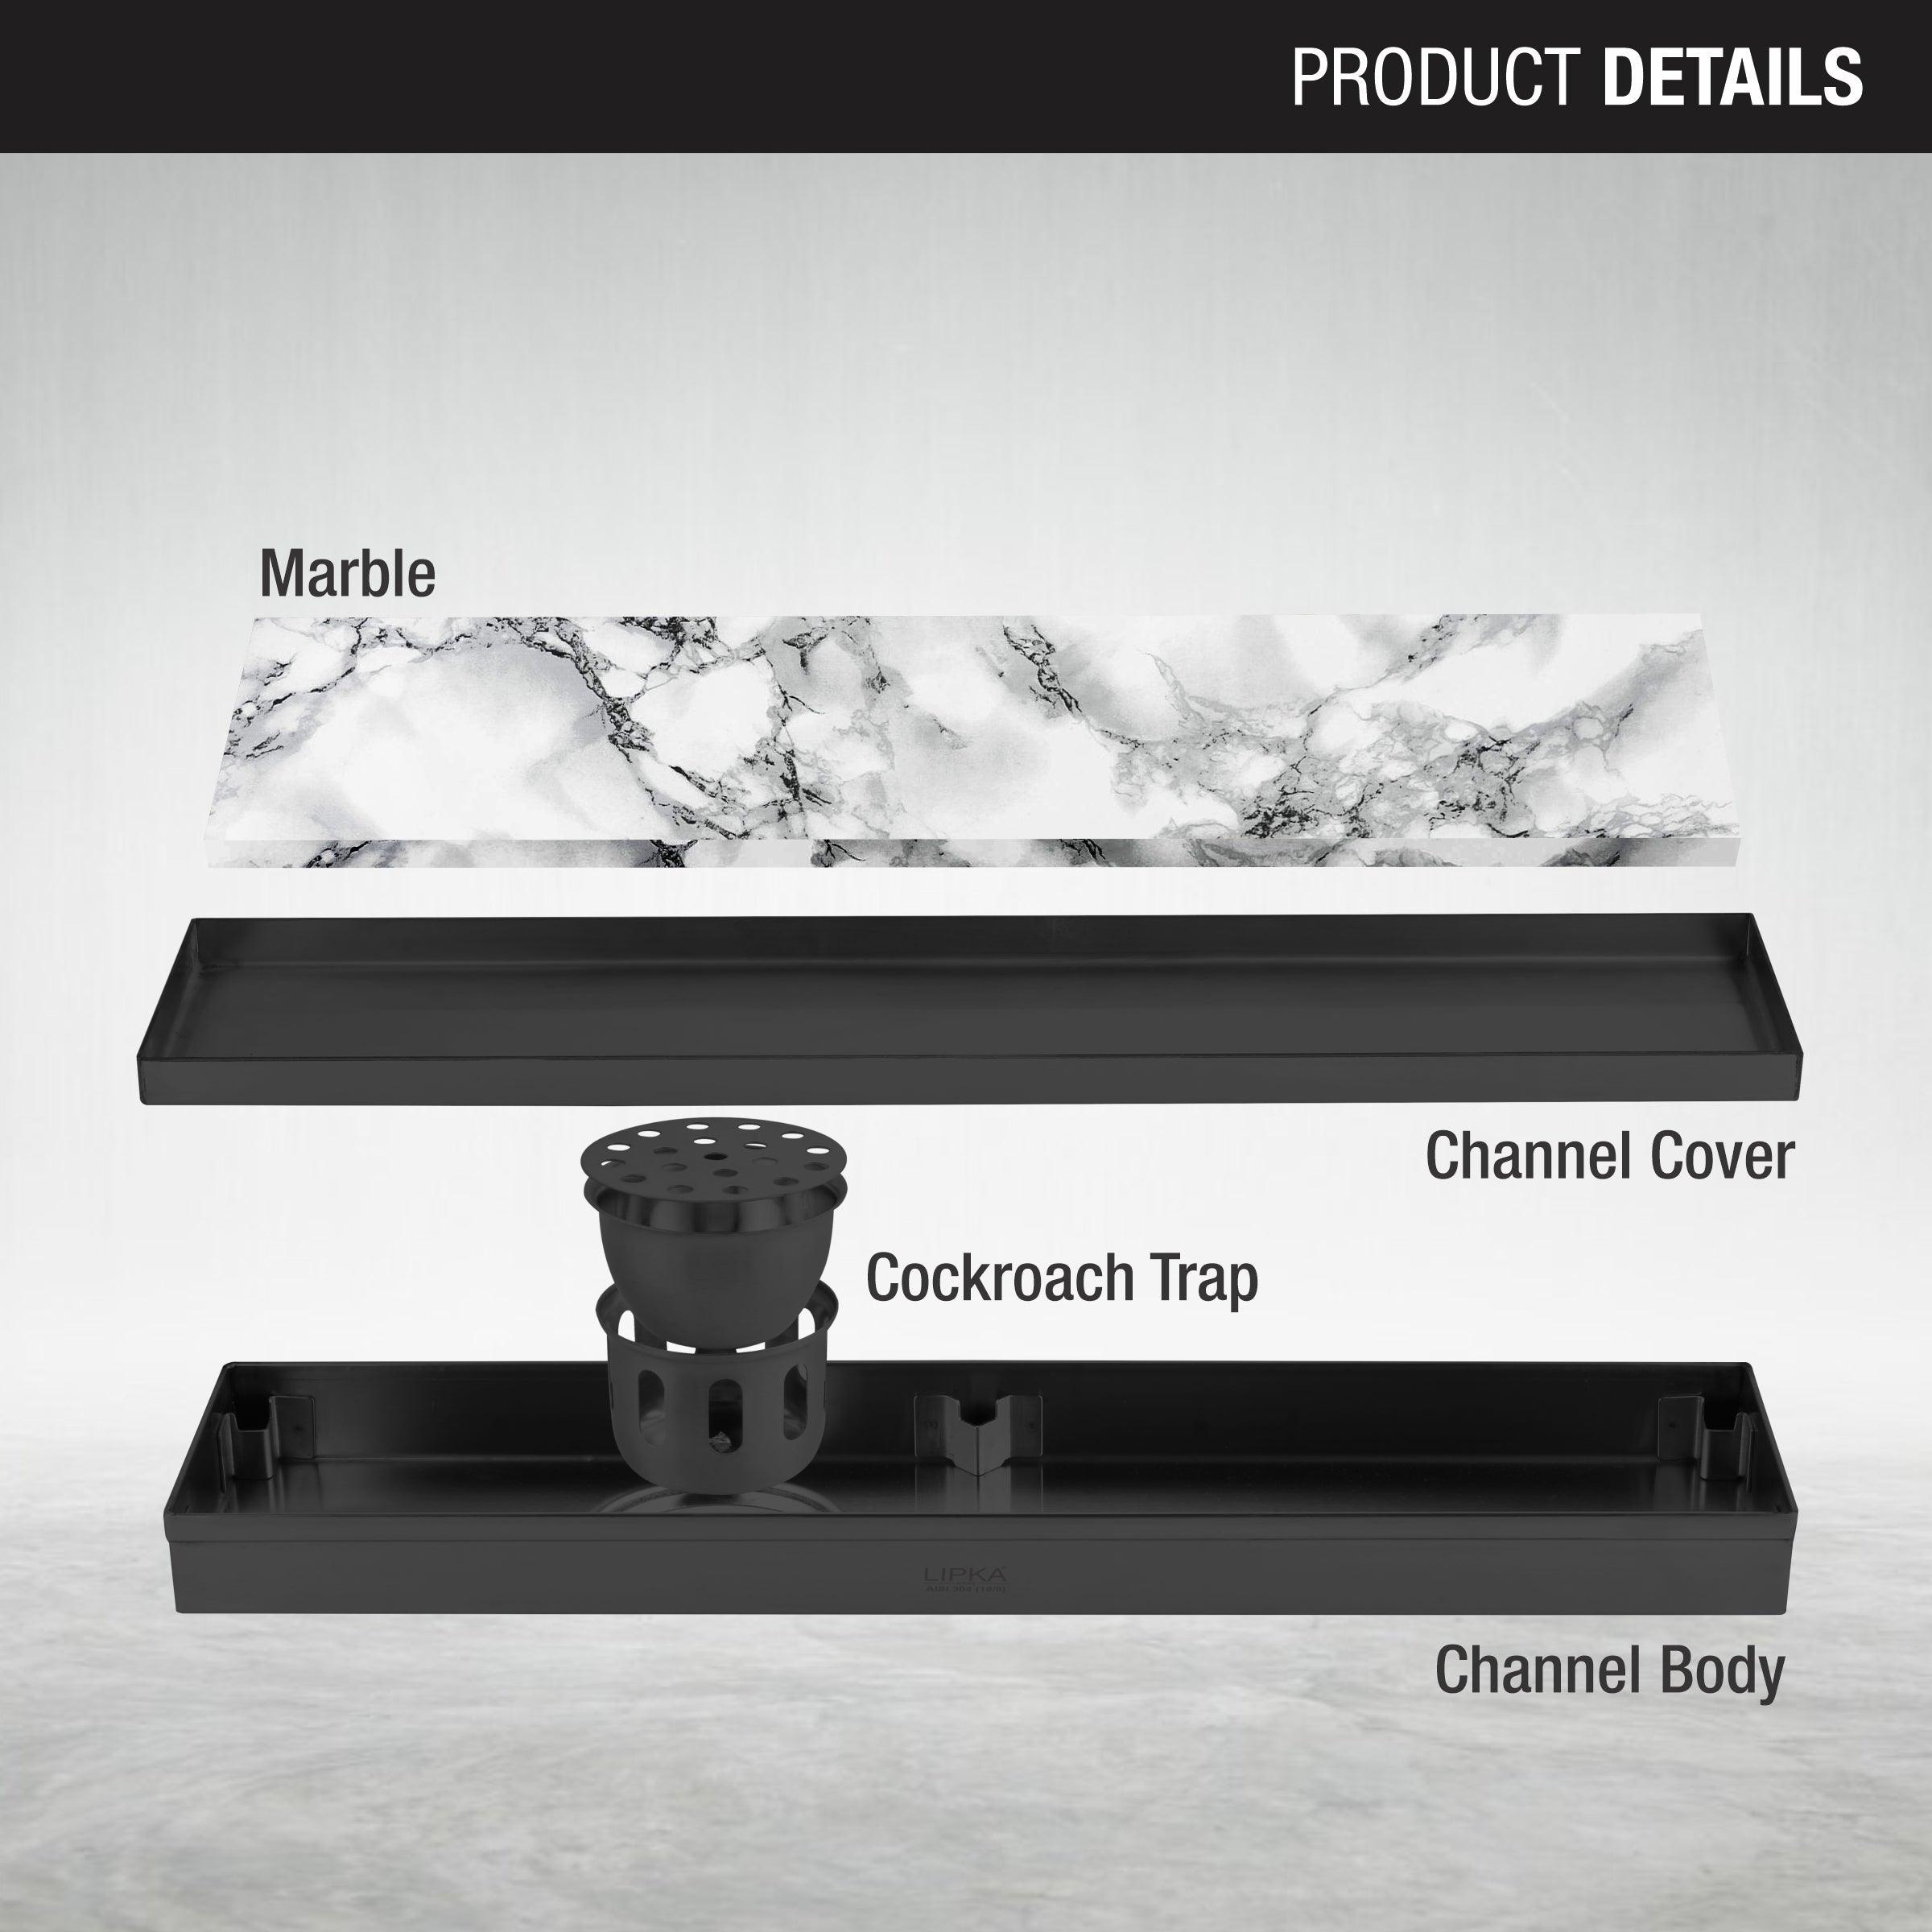 Marble Insert Shower Drain Channel - Black (24 x 3 Inches) product parts